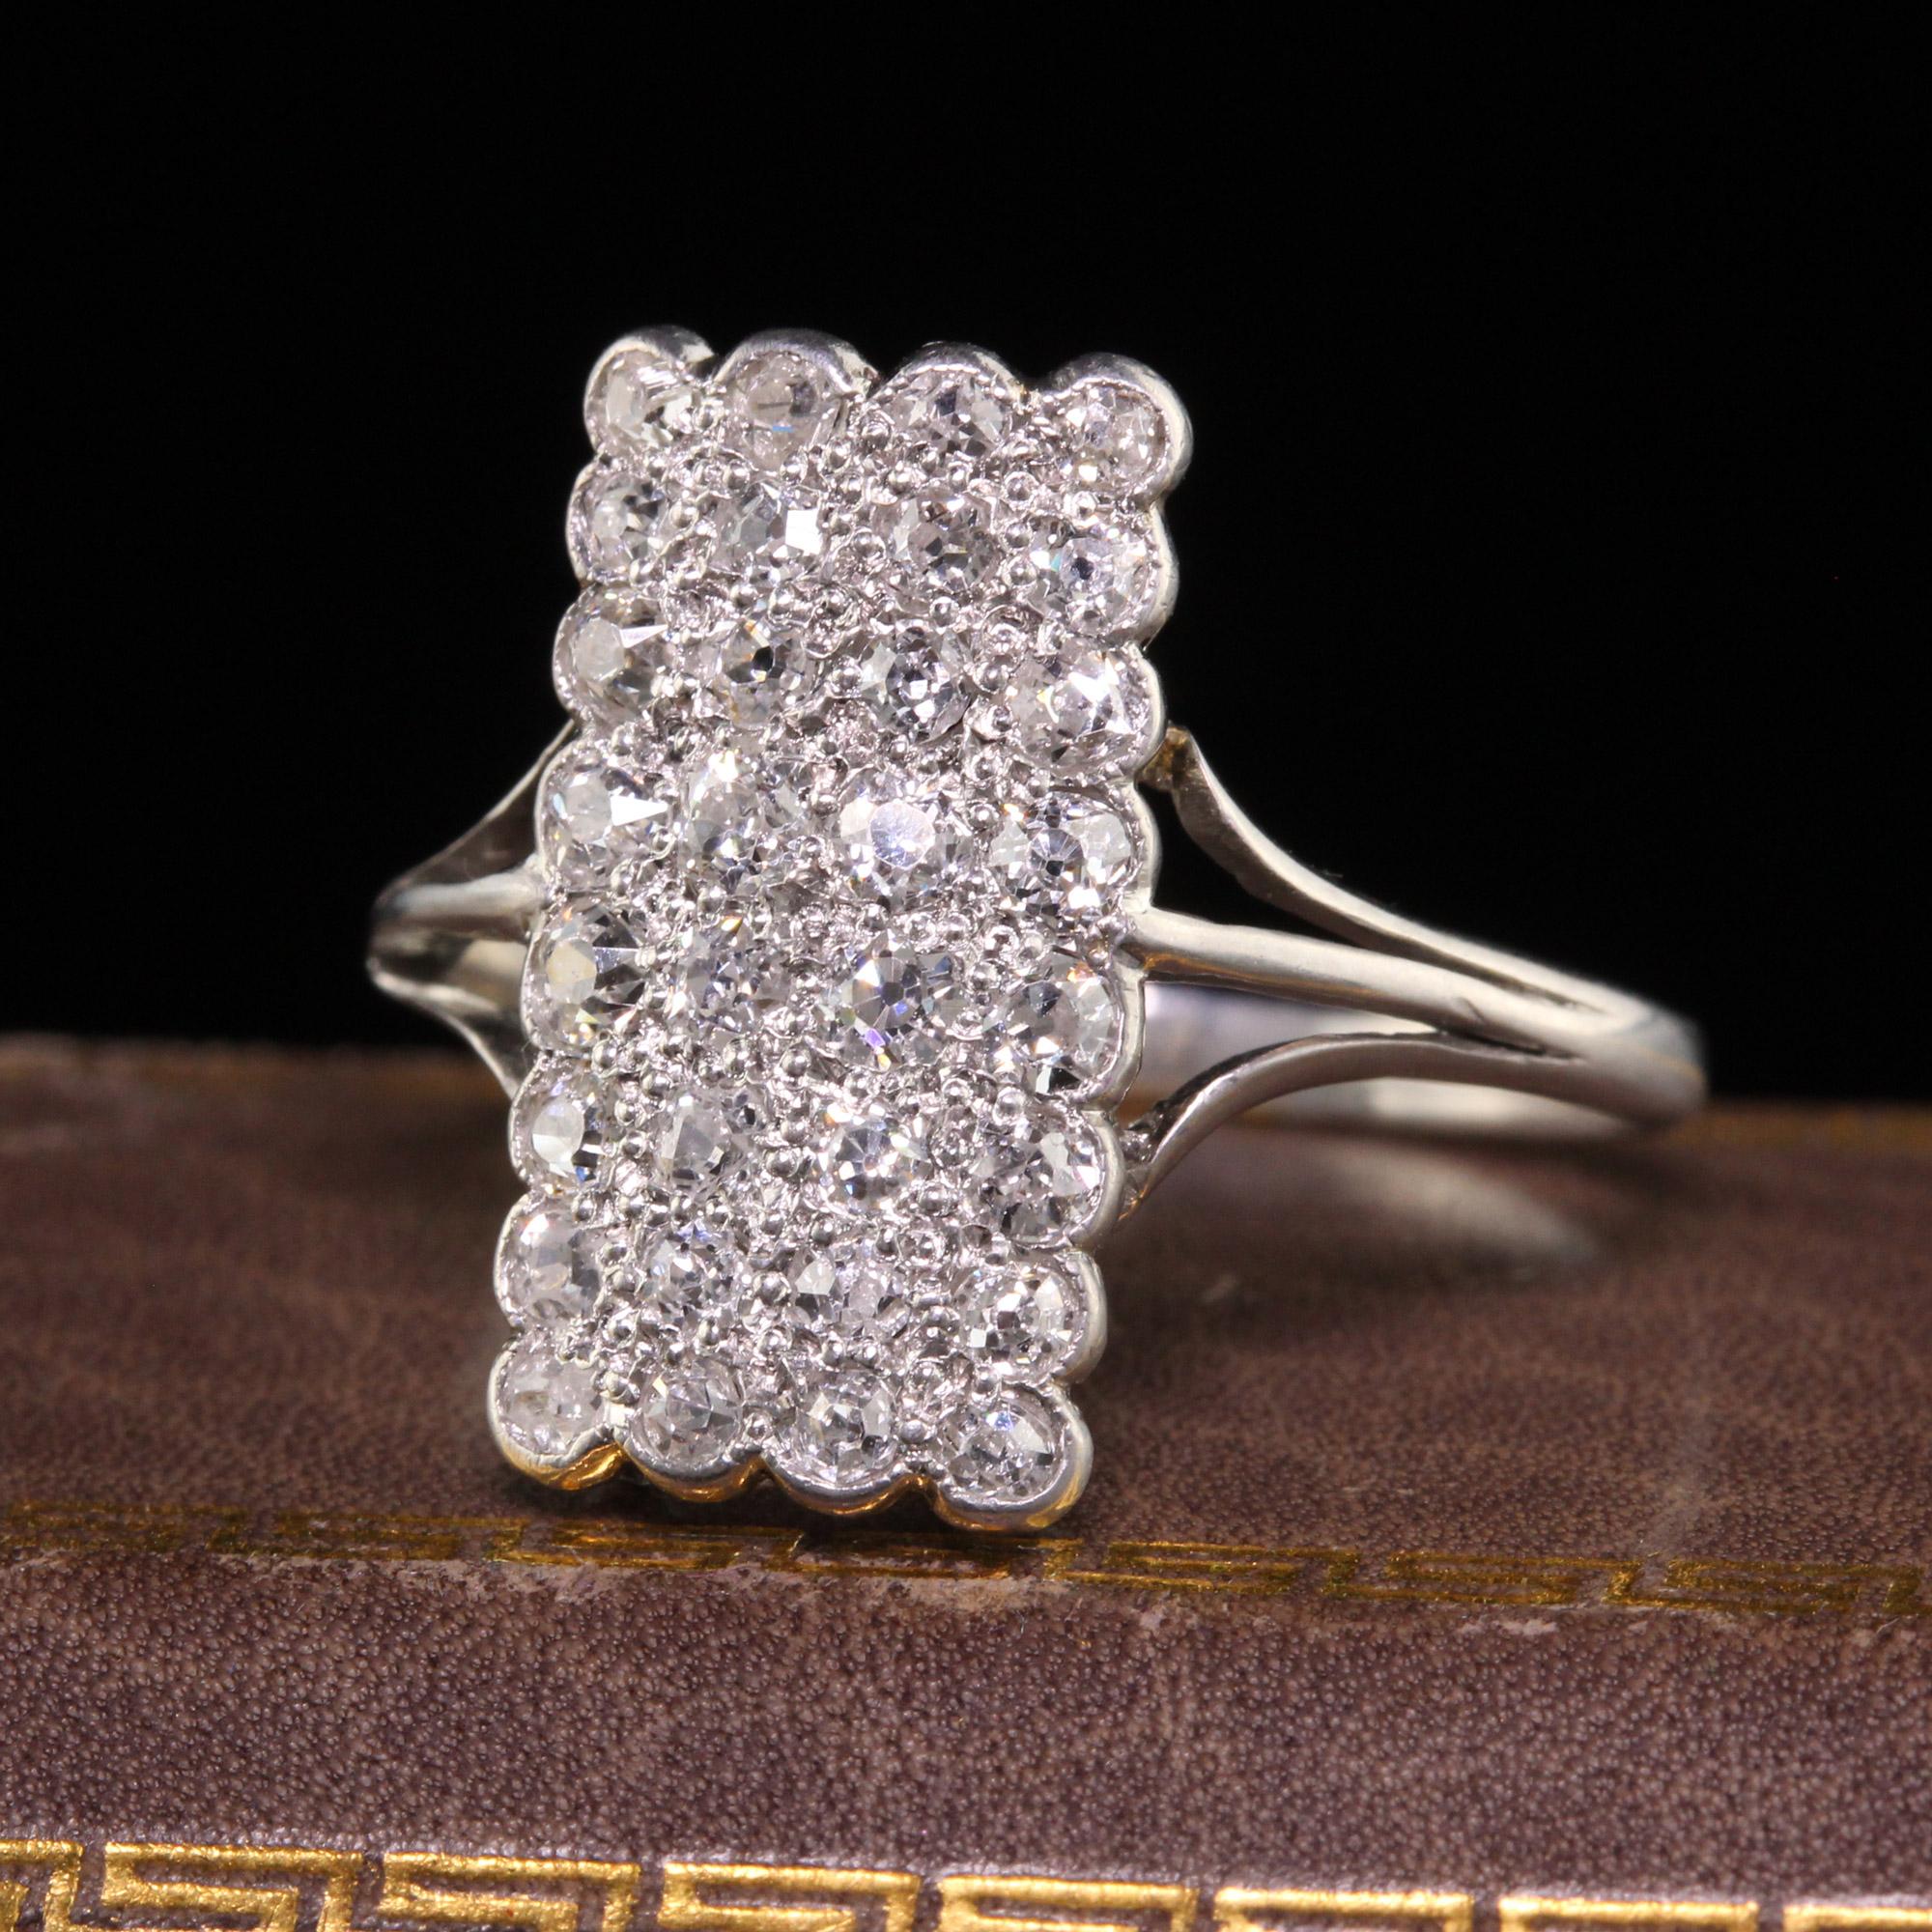 Beautiful Antique Edwardian Platinum Old Mine Cut Diamond Pave Shield Ring. This incredible shield ring is crafted in platinum. The ring holds chunky old cut diamonds that are set flush on top of the ring. The ring is in great condition with a few